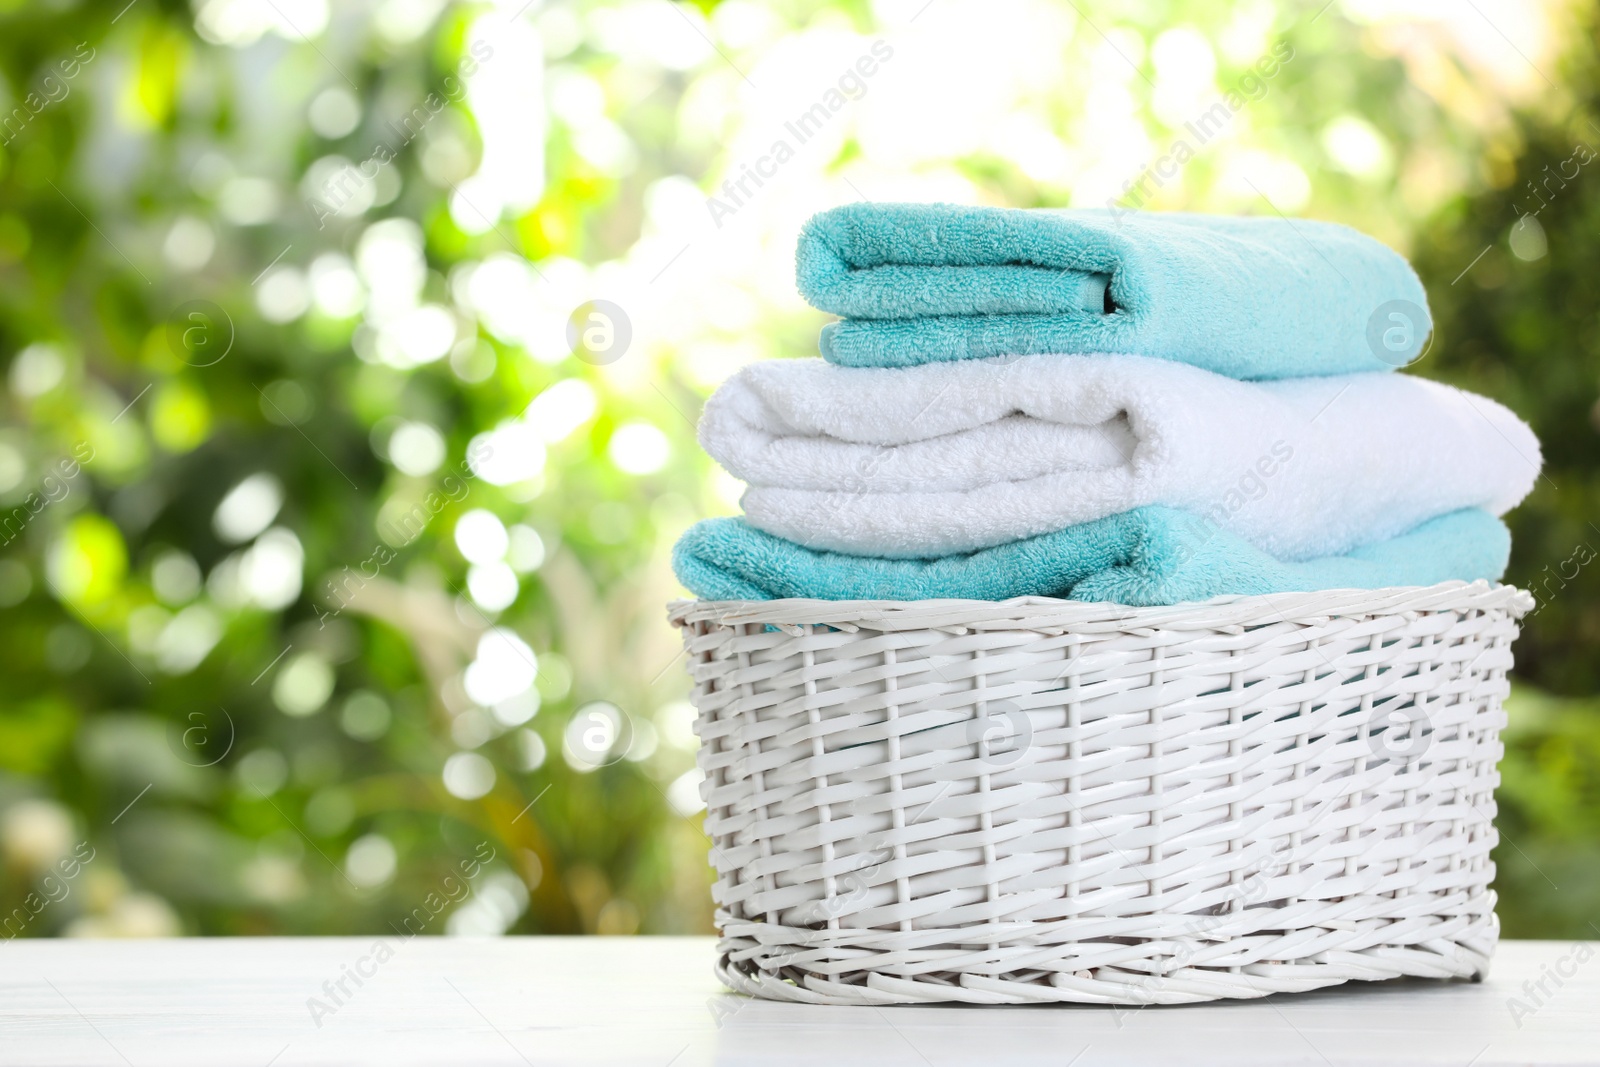 Photo of Basket with soft bath towels on table against blurred background. Space for text